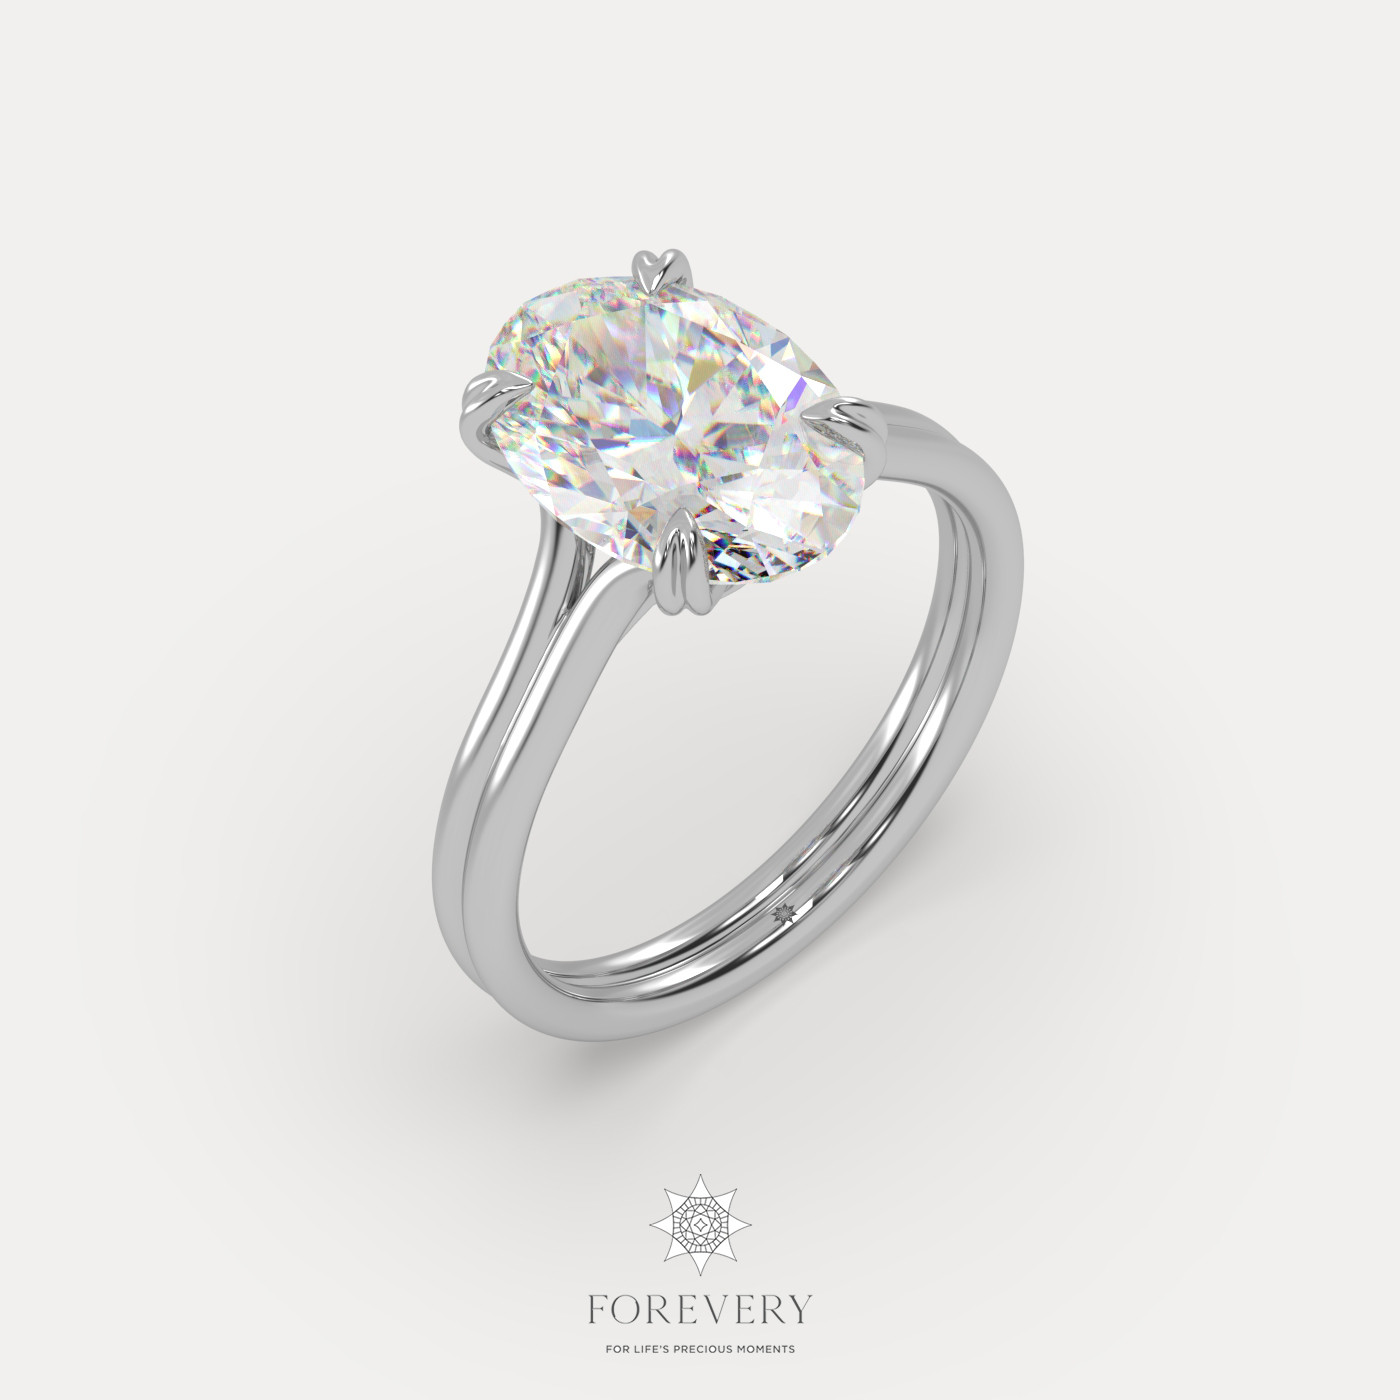 18K WHITE GOLD Oval Cut Diamond Solitaire Engagament Ring